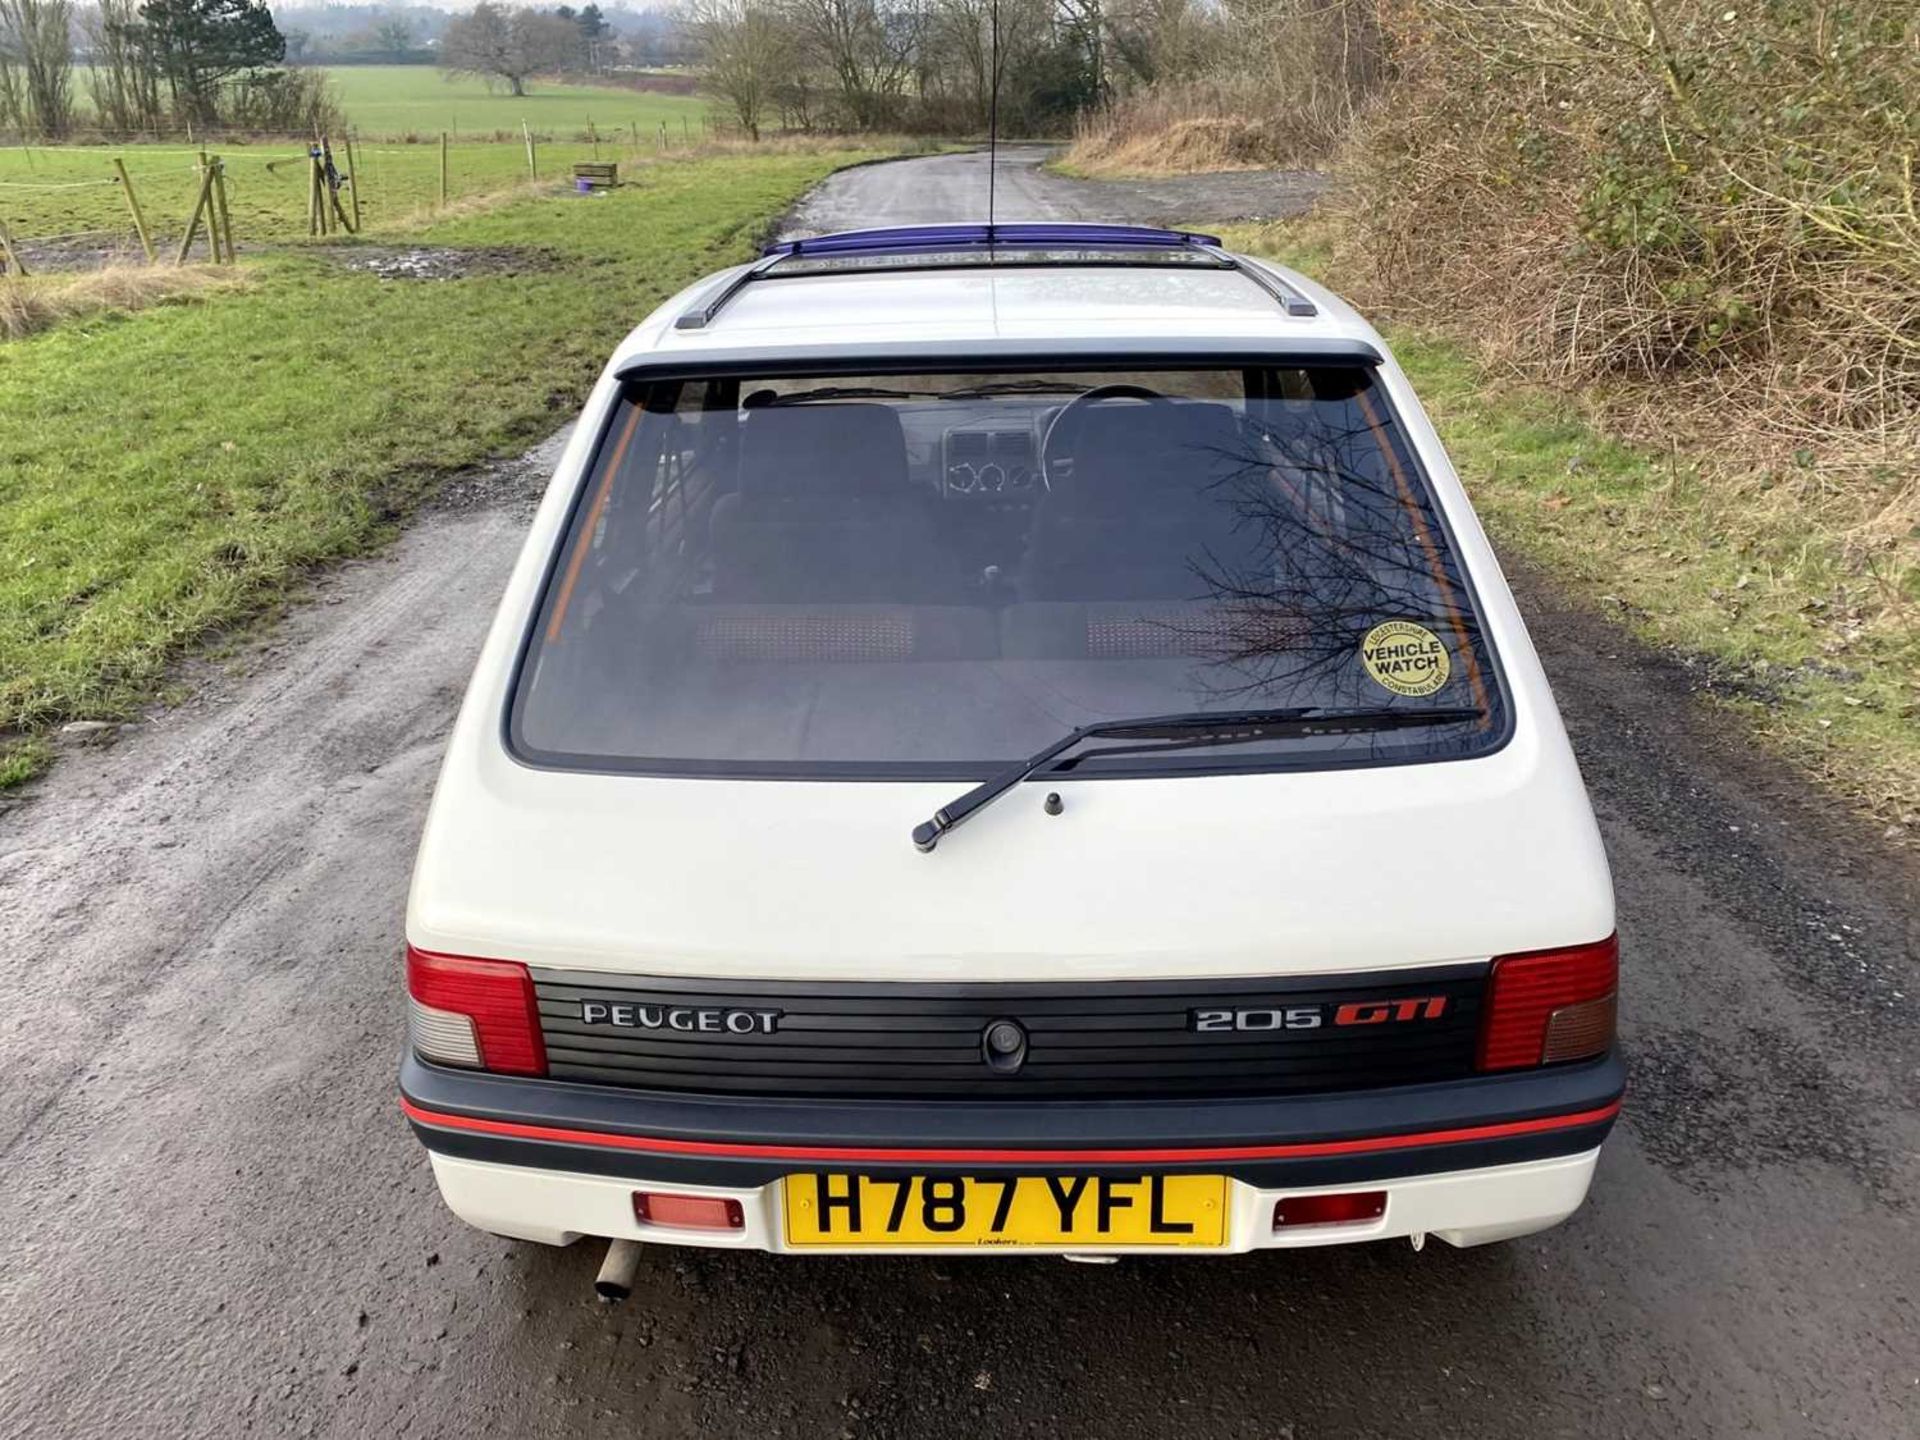 1990 Peugeot 205 GTi 1.6 Only 56,000 miles, same owner for 16 years - Image 16 of 81